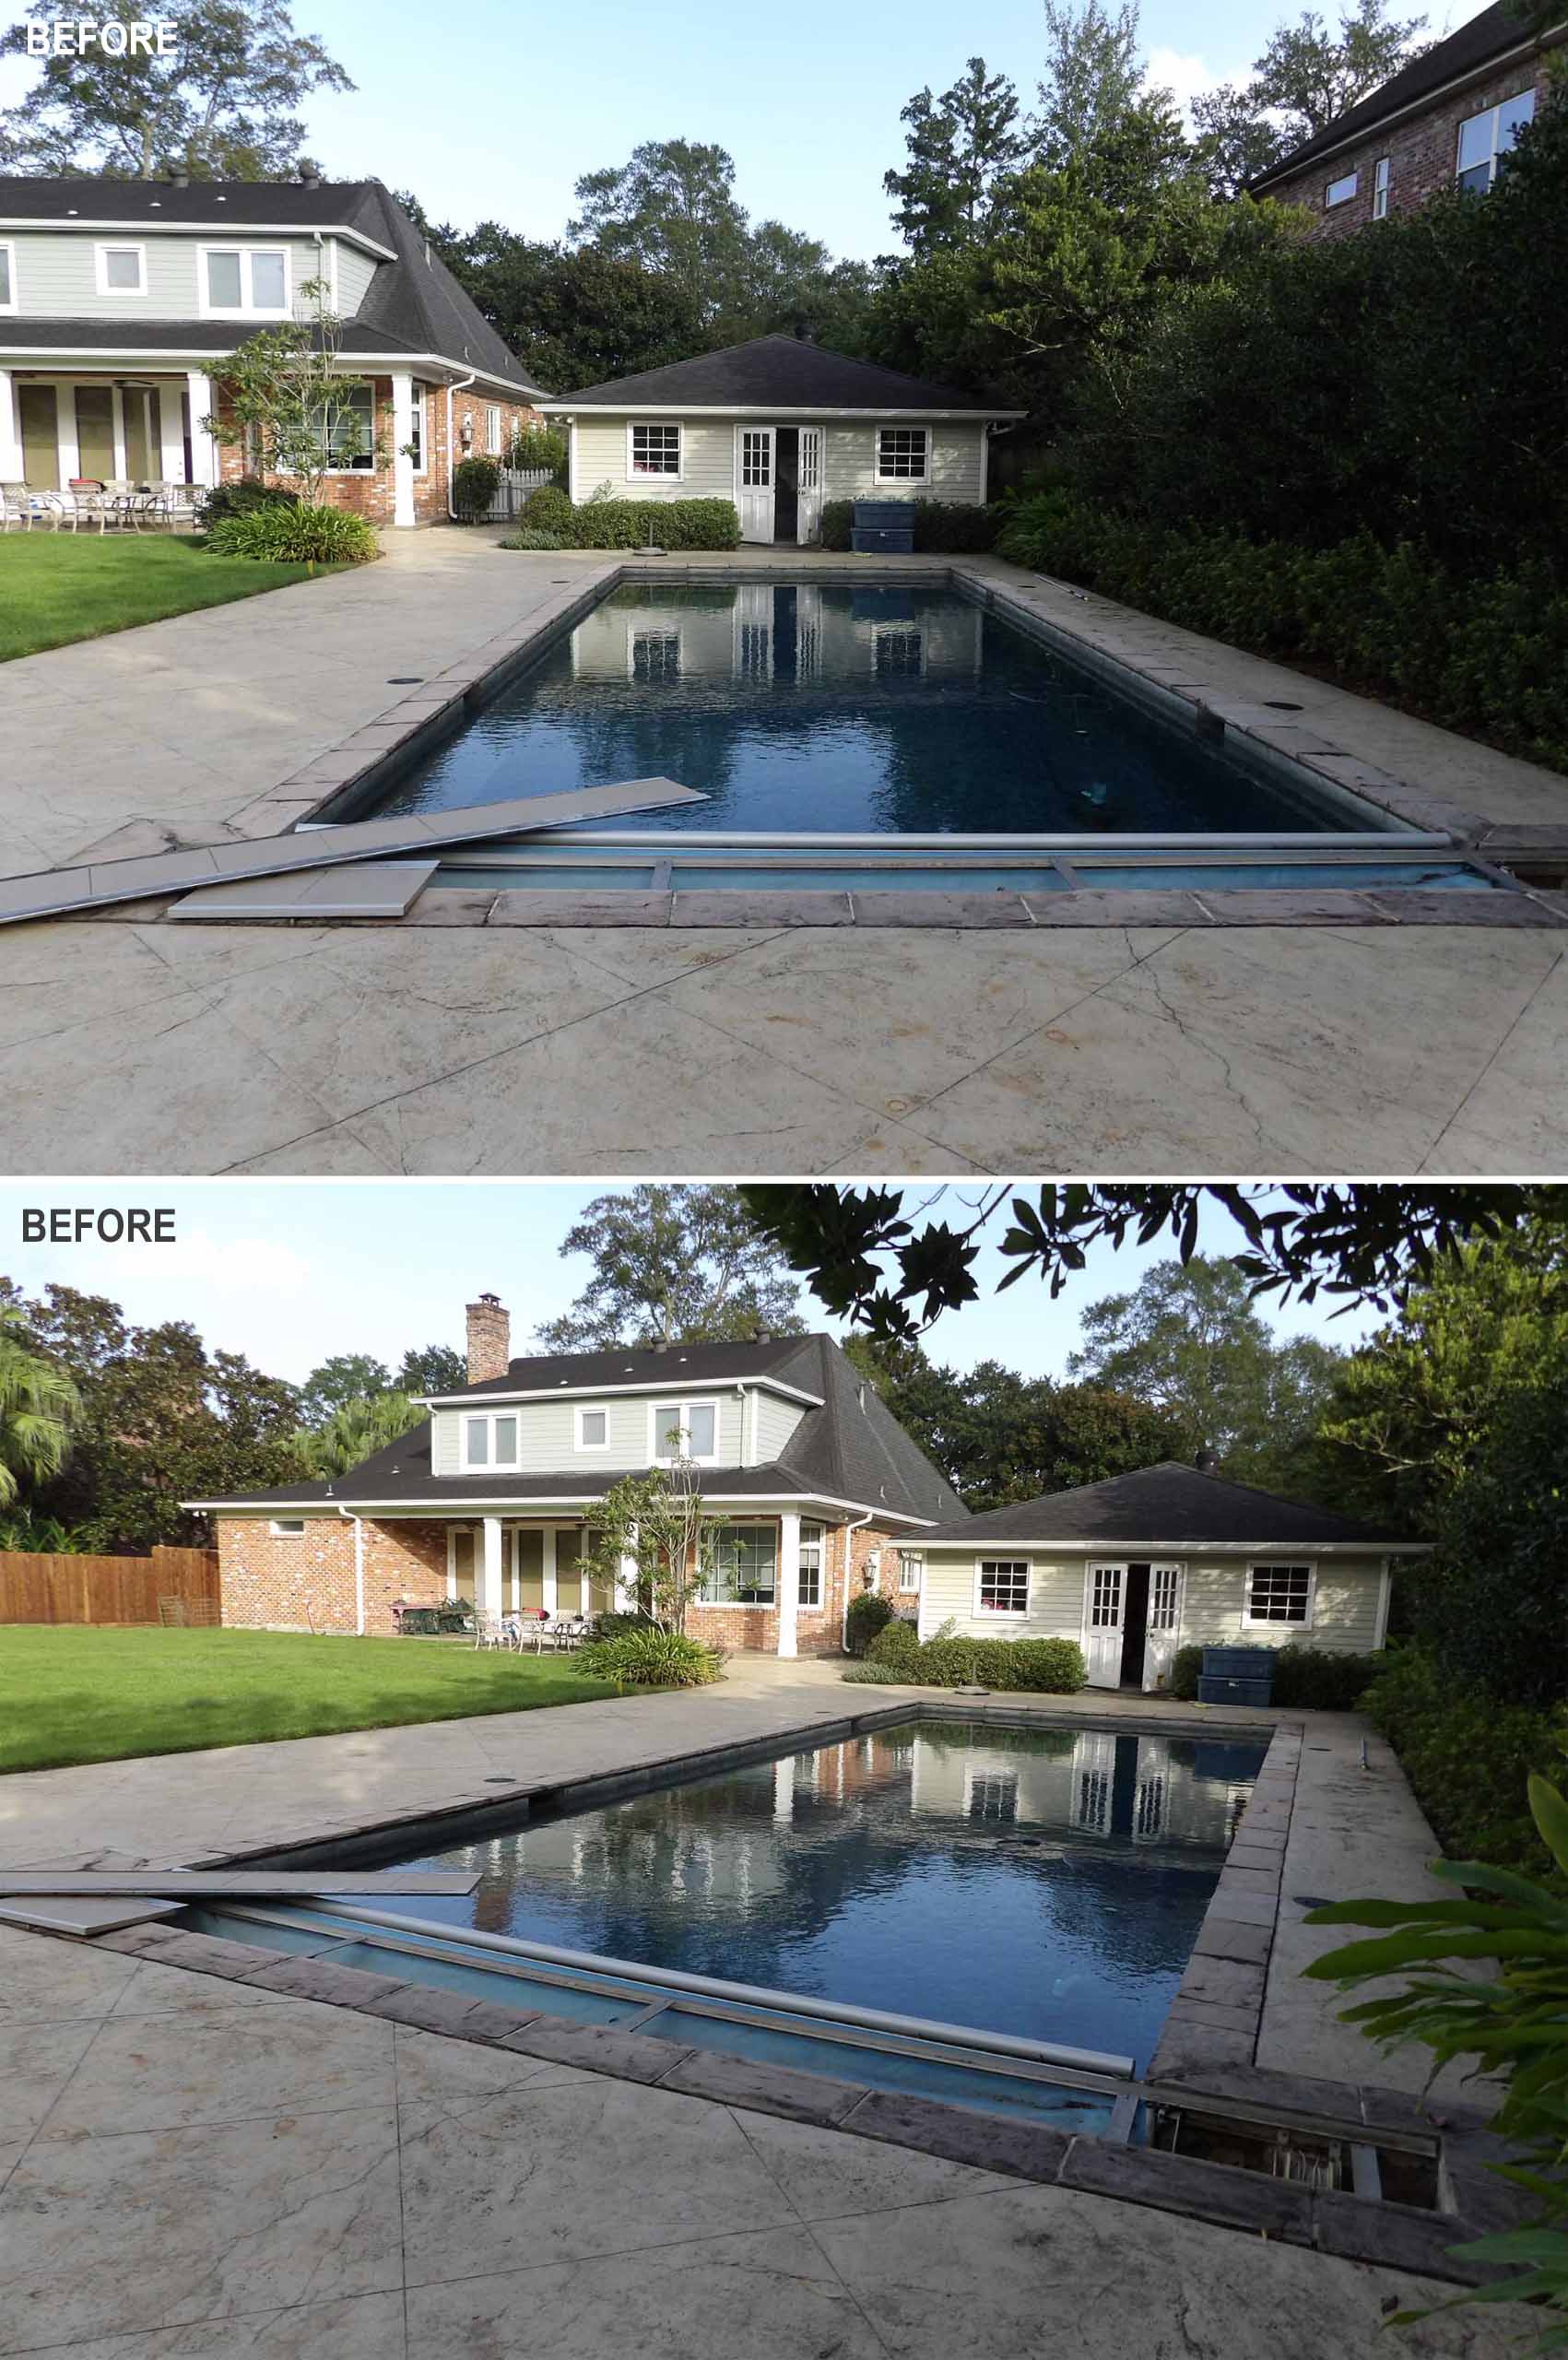 BEFORE - A garage was transformed into a modern pool house with a bar and covered seating.